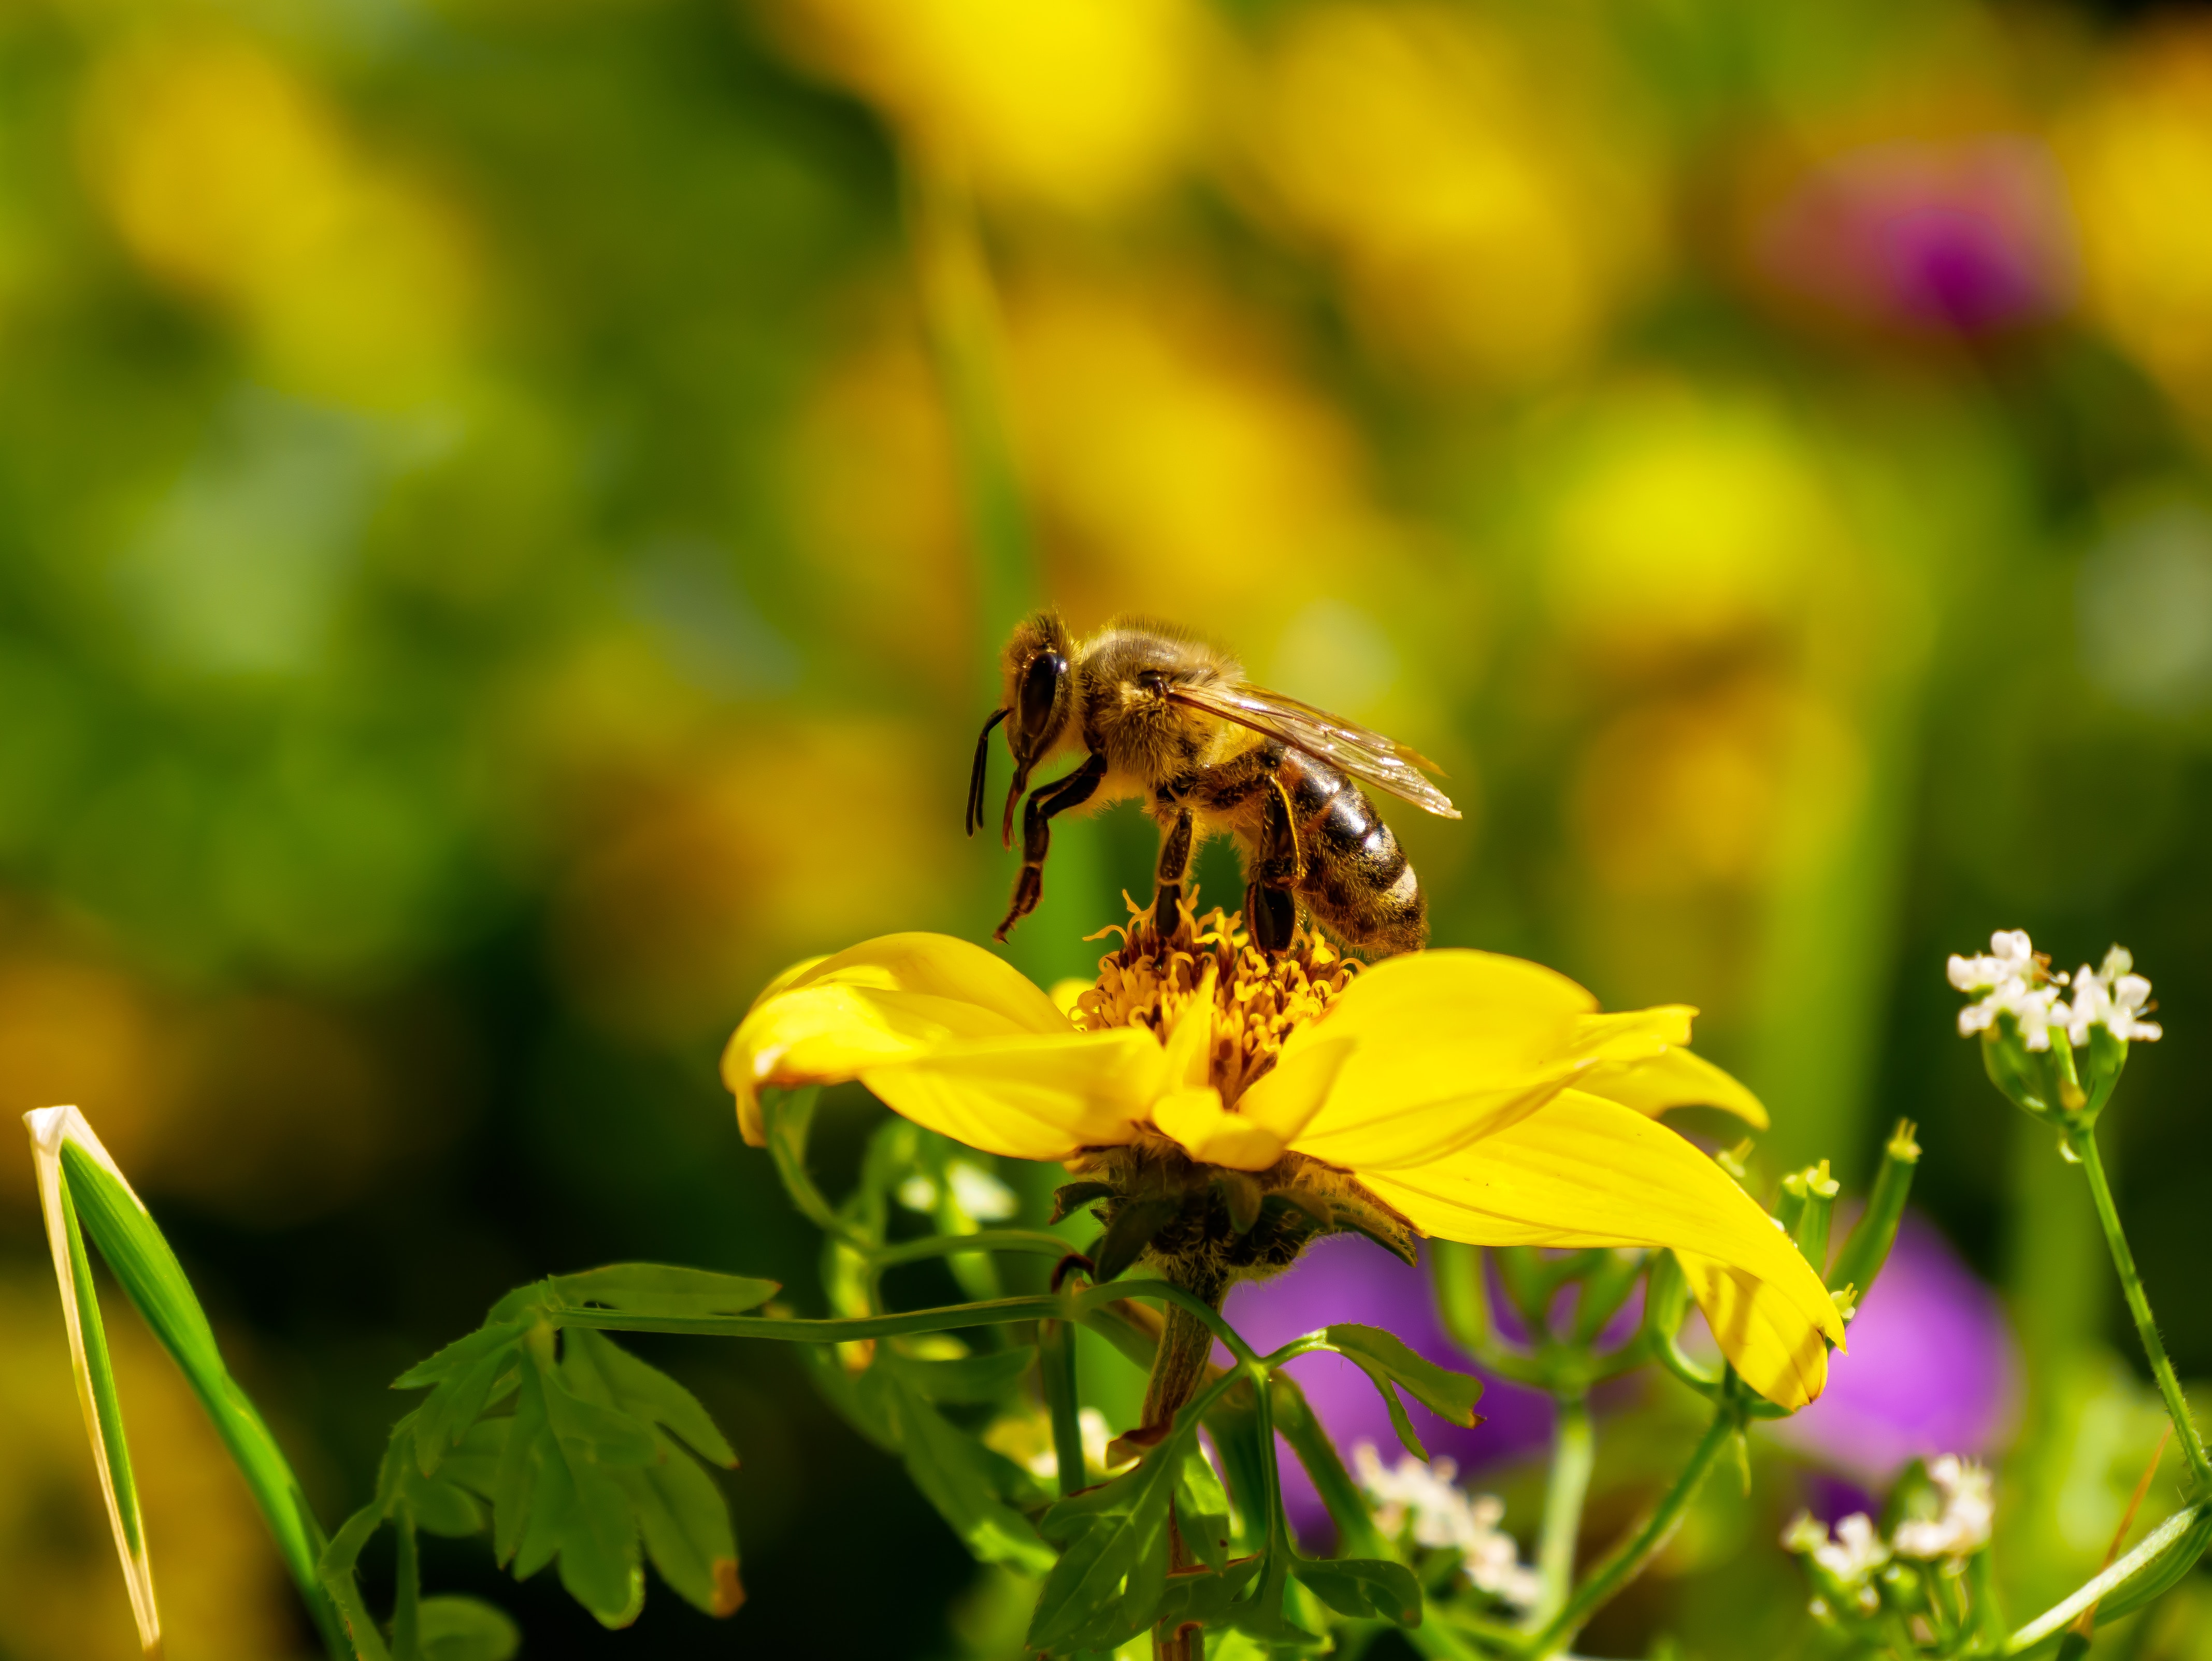 Bees, wasps and hornets: how to recognize them and how to defend themselves